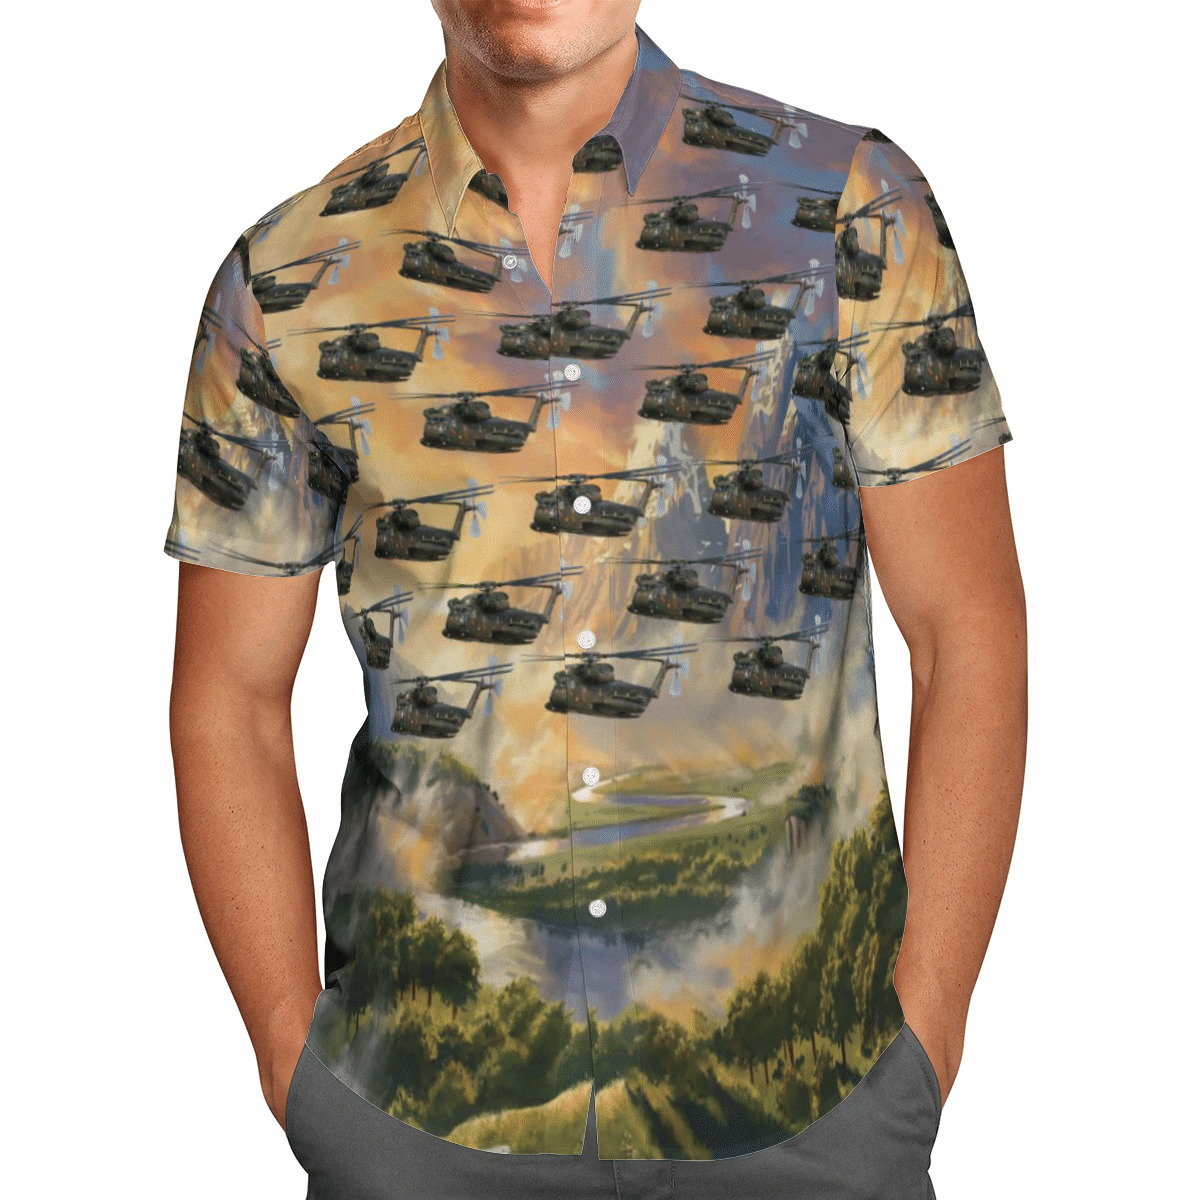 HOT SIKORSKY CH-53 GERMAN AIR FORCE All Over Print Tropical Shirt1